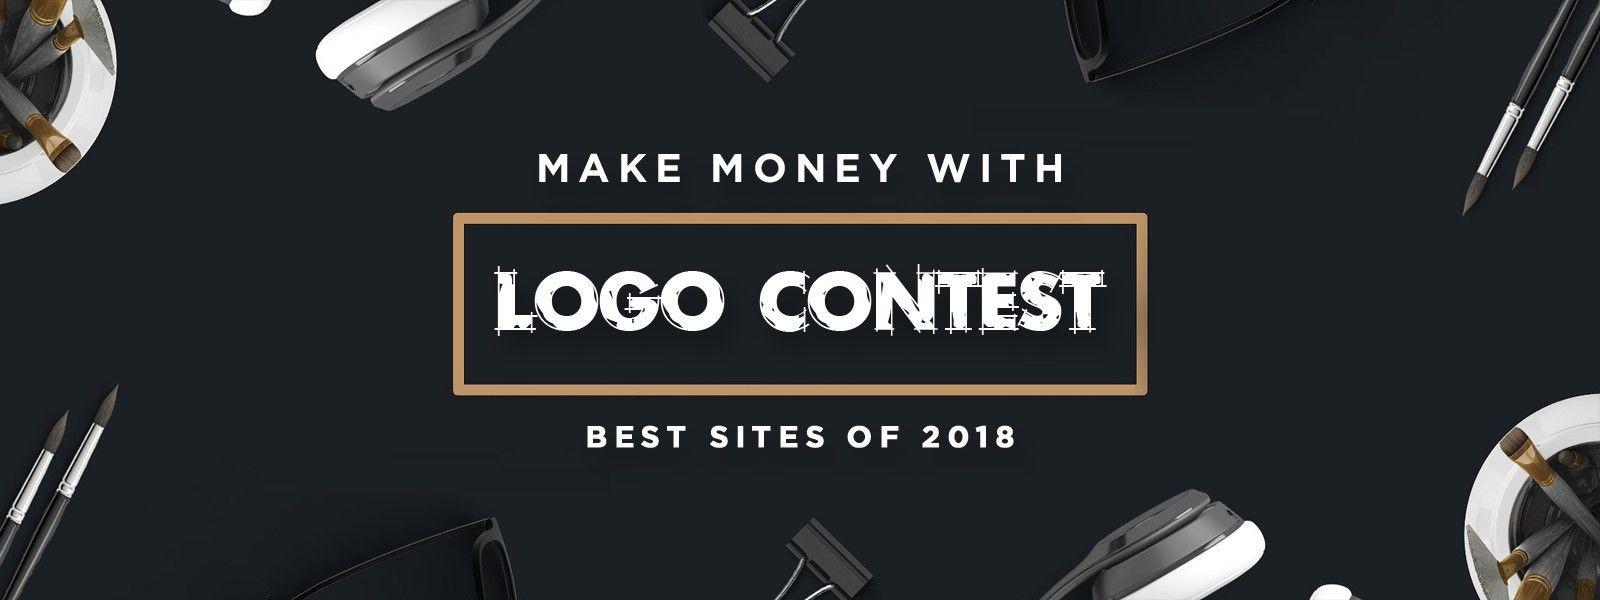 Contest Logo - 10 Best Websites & Tips (Easy to Follow) to Win Logo Design Contest